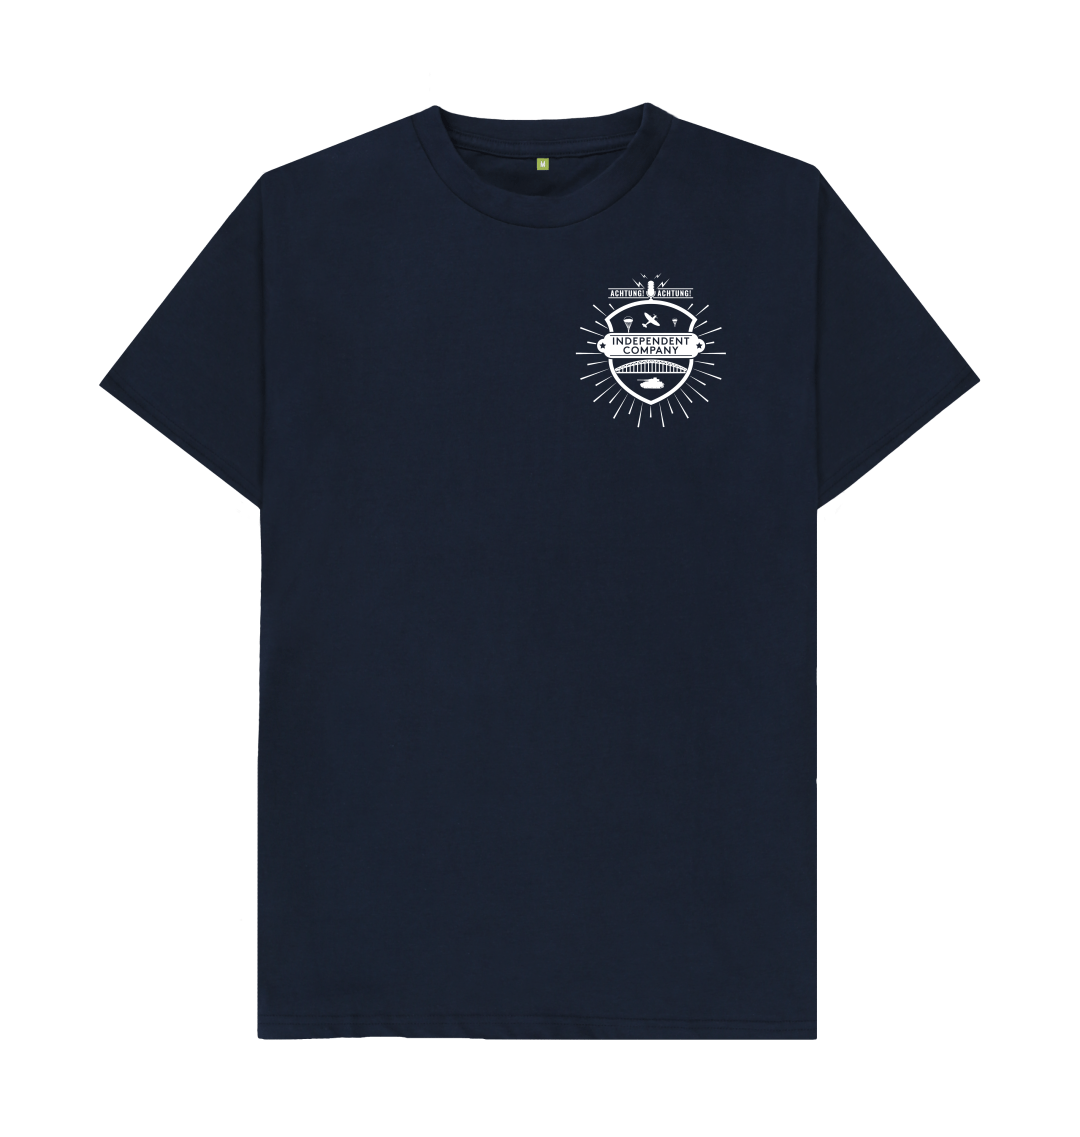 The Independent Company T-Shirt - White Logo